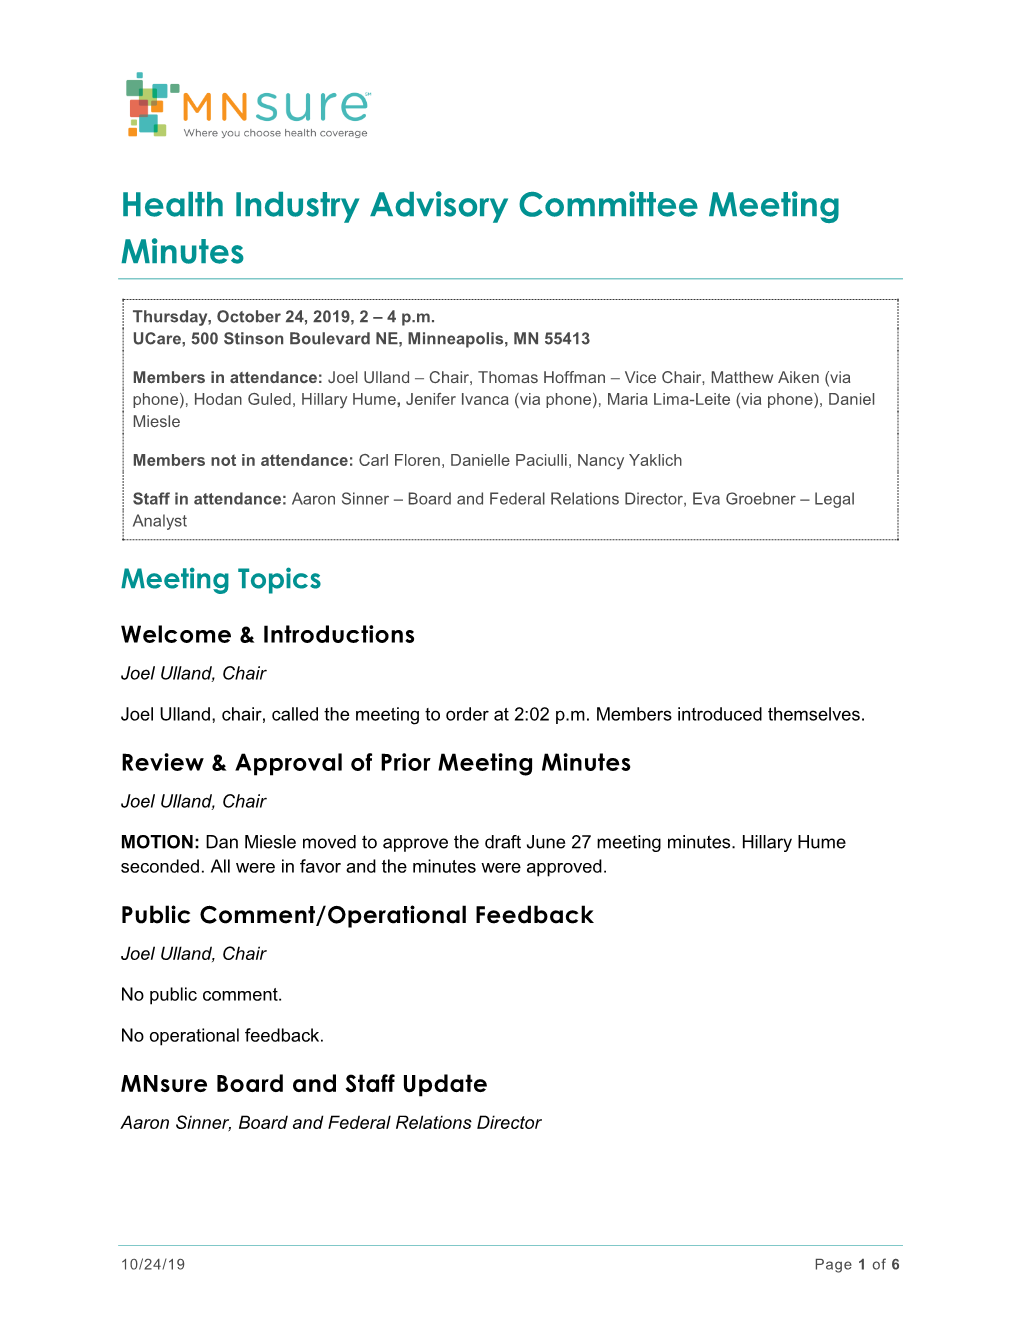 Health Industry Advisory Committee Meeting Minutes